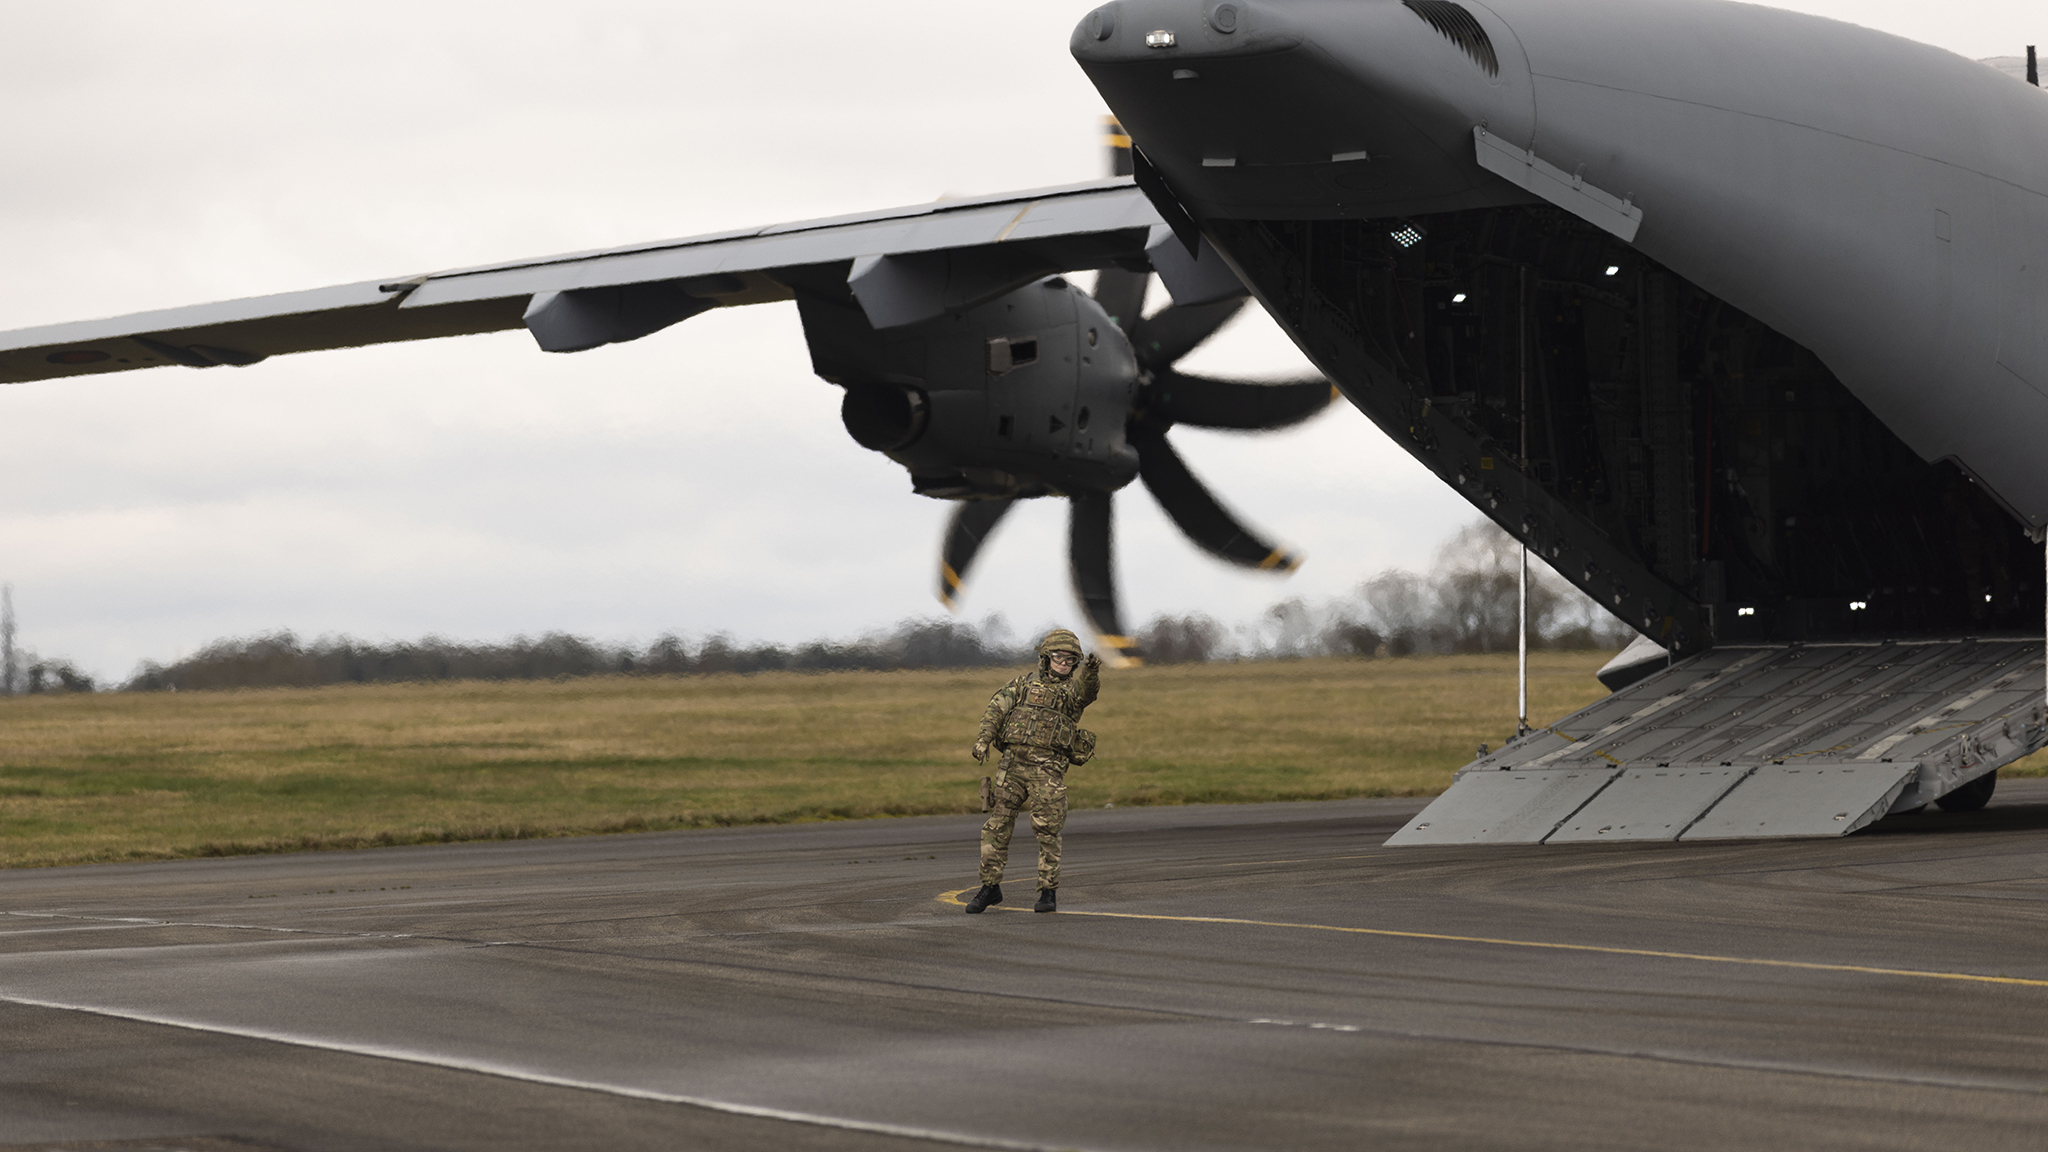 Number 1 Air Mobility Wing (1AMW) based at Royal Air Force Brize Norton have been adding an extra level of realism to their training during Exercise Swift Pirate, which took place at Royal Air Force Wittering.